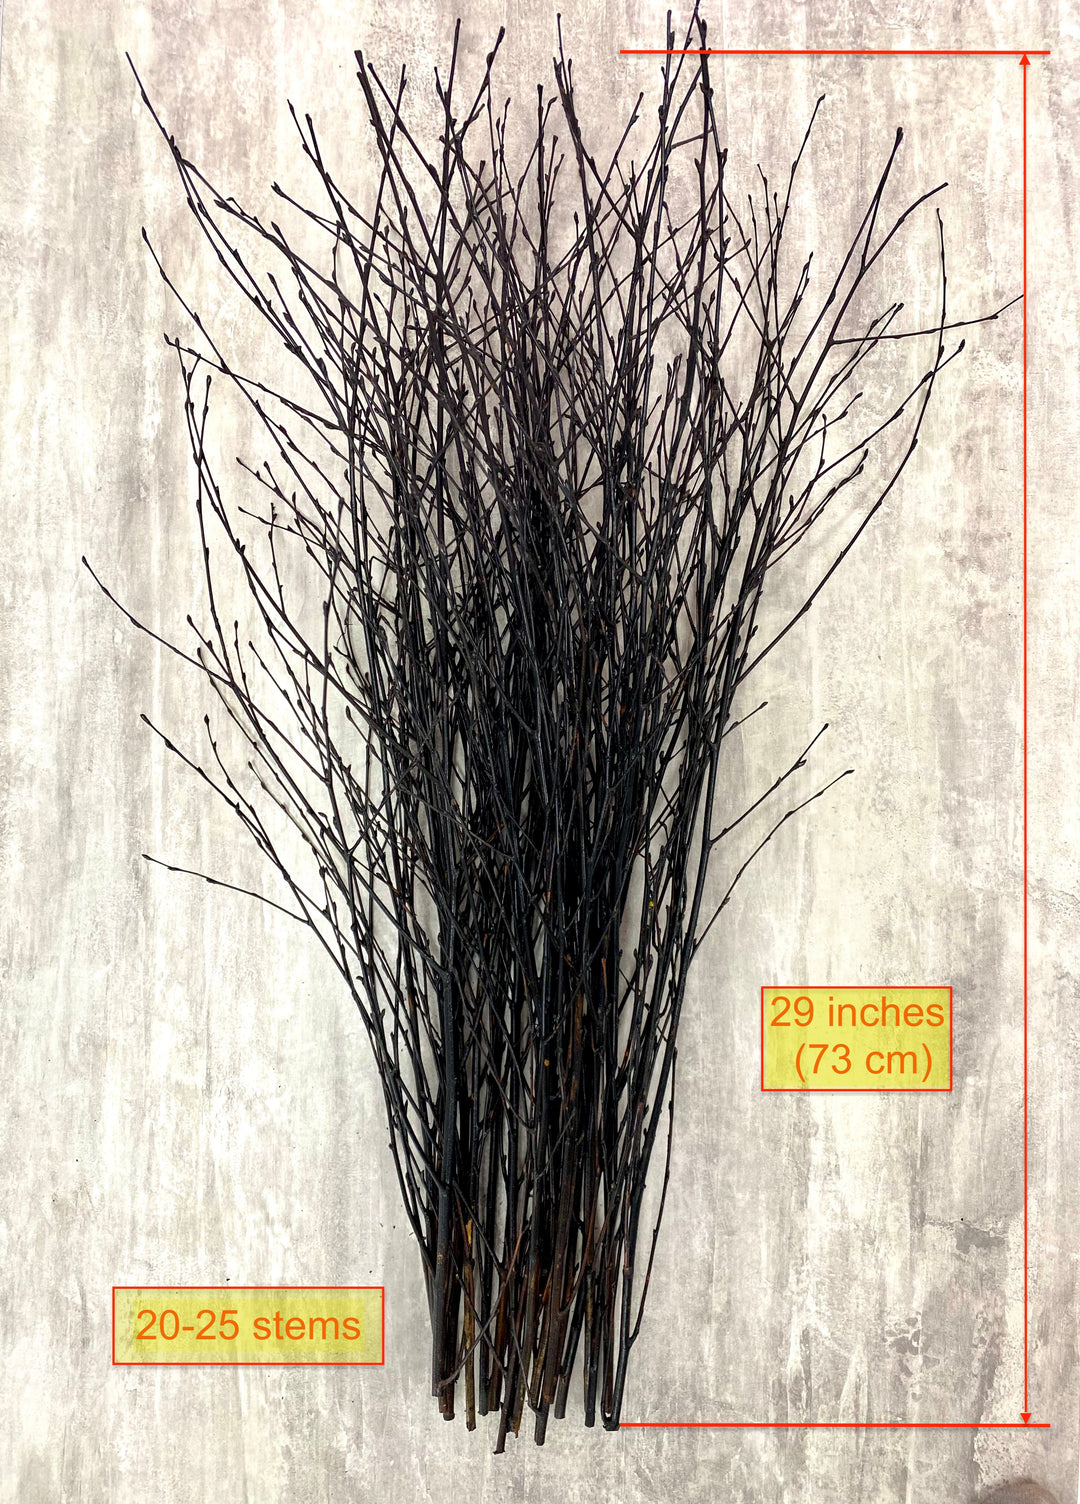 ECOVENIK 25 psc - Black Birch Branches - 73 cm, Natural Birch Twigs, Pack  of 20-25 Stems, Long for Floor vases, 29 inch…